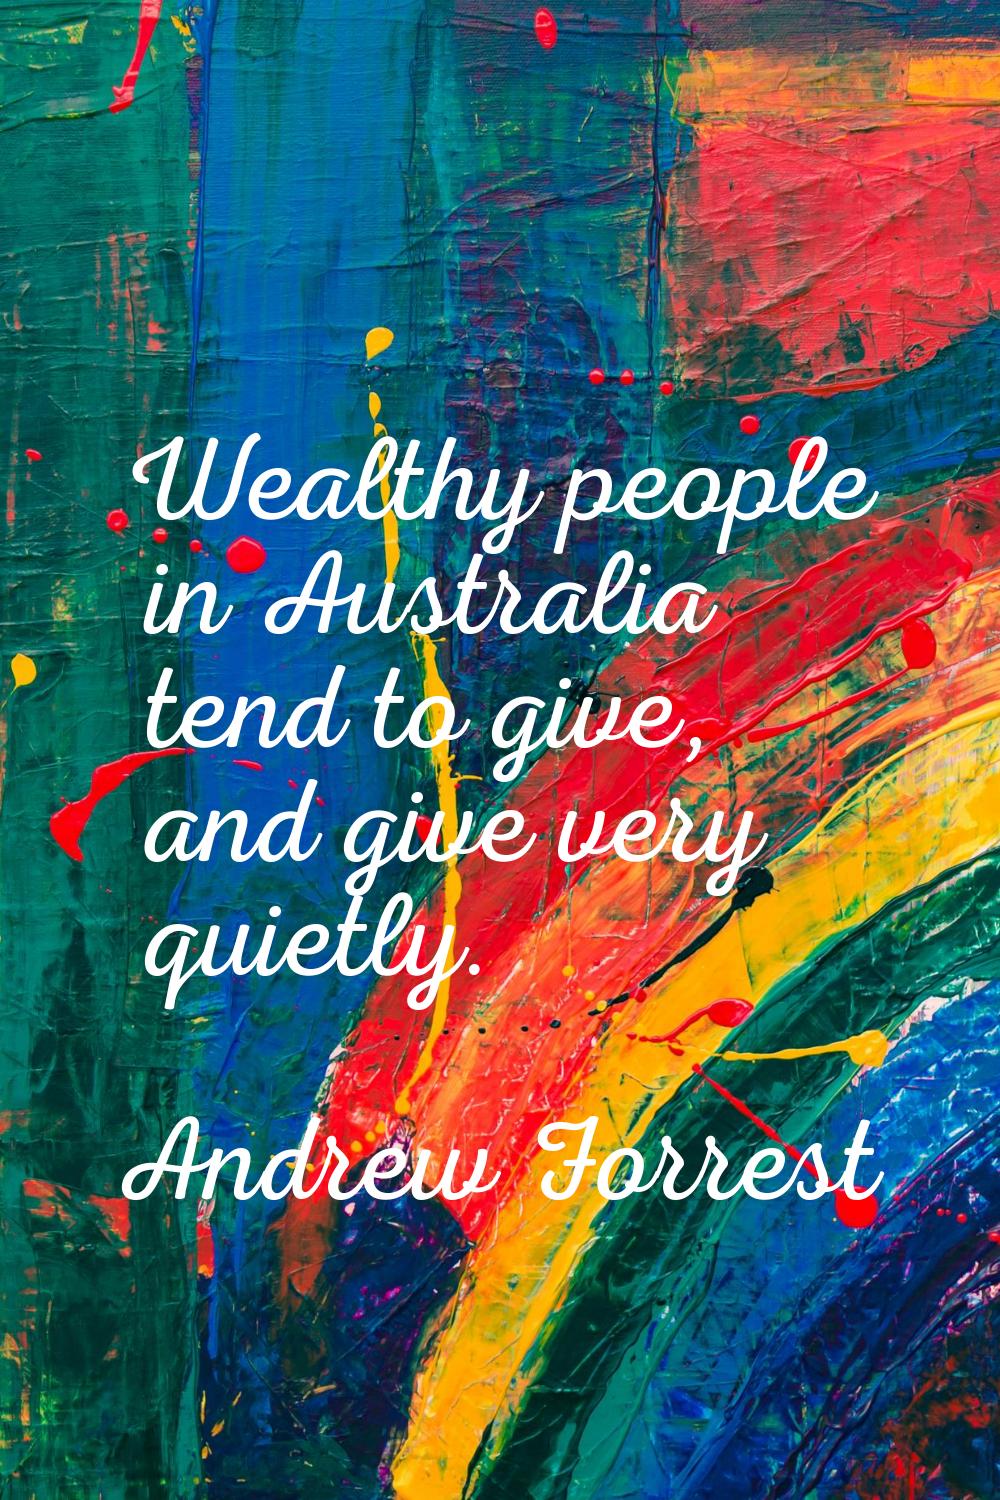 Wealthy people in Australia tend to give, and give very quietly.